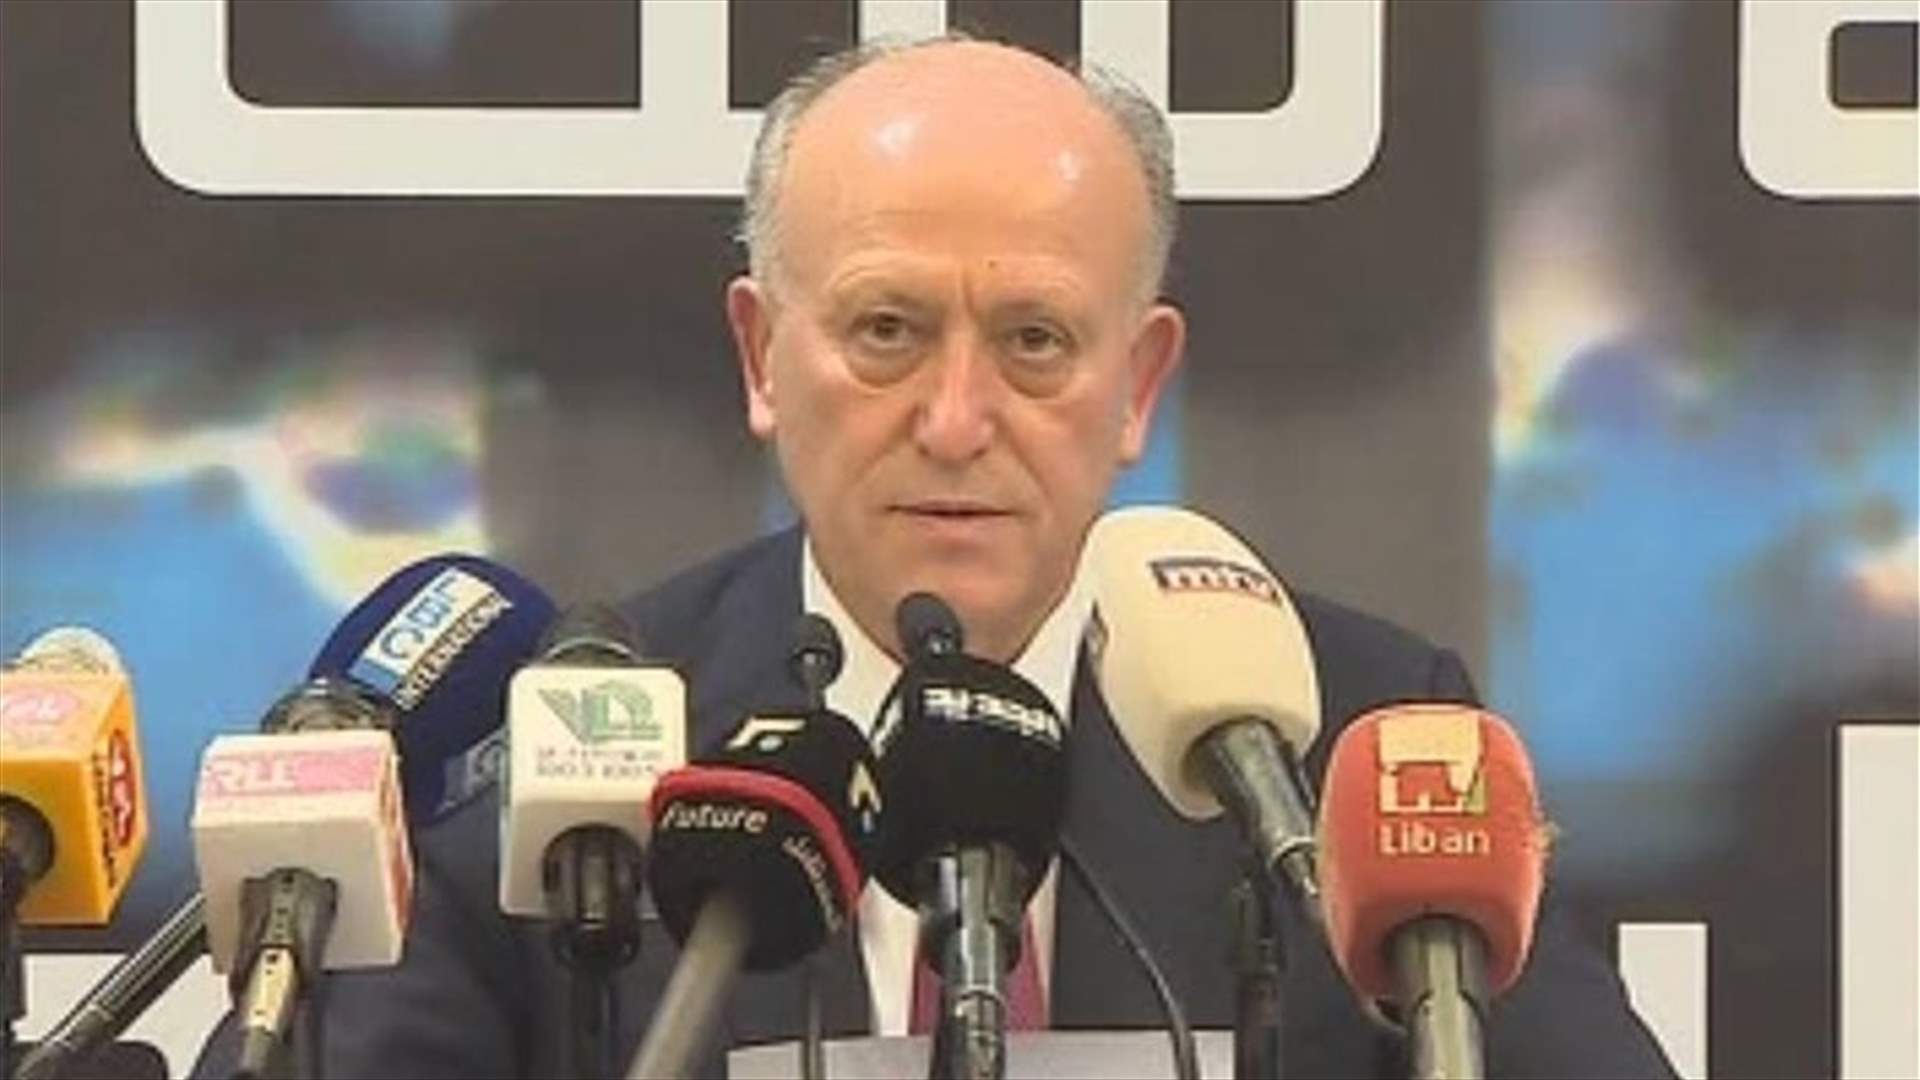 Rifi says Bassil is the most corrupt in the Lebanese Republic